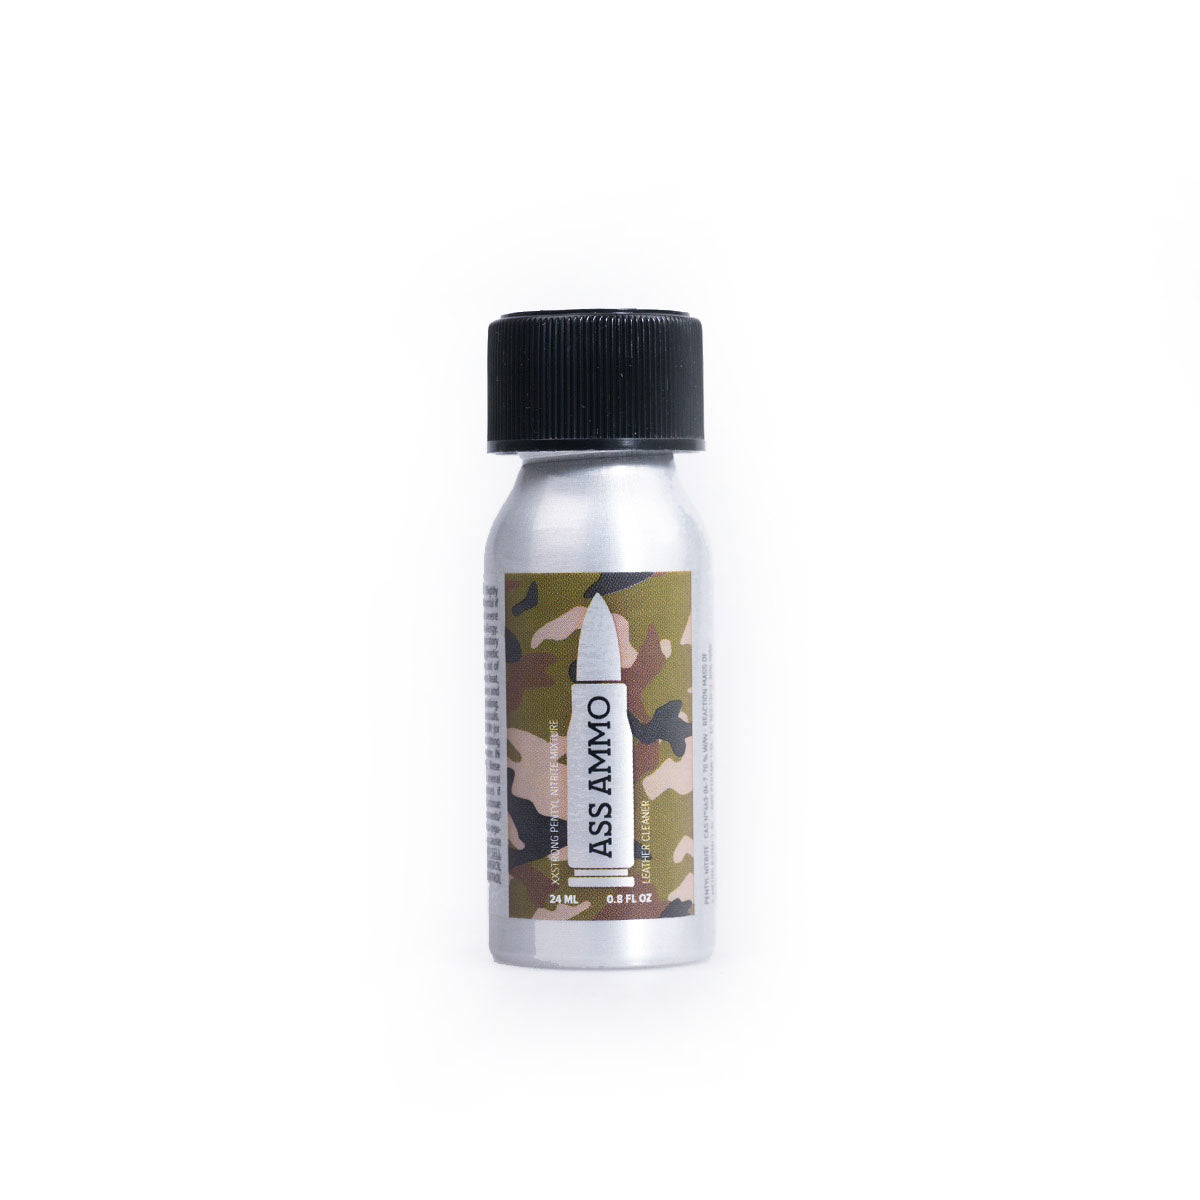 POPPERS UK, POPPERS USA, FREE DELIVERY, NEXT DAY DELIVERY